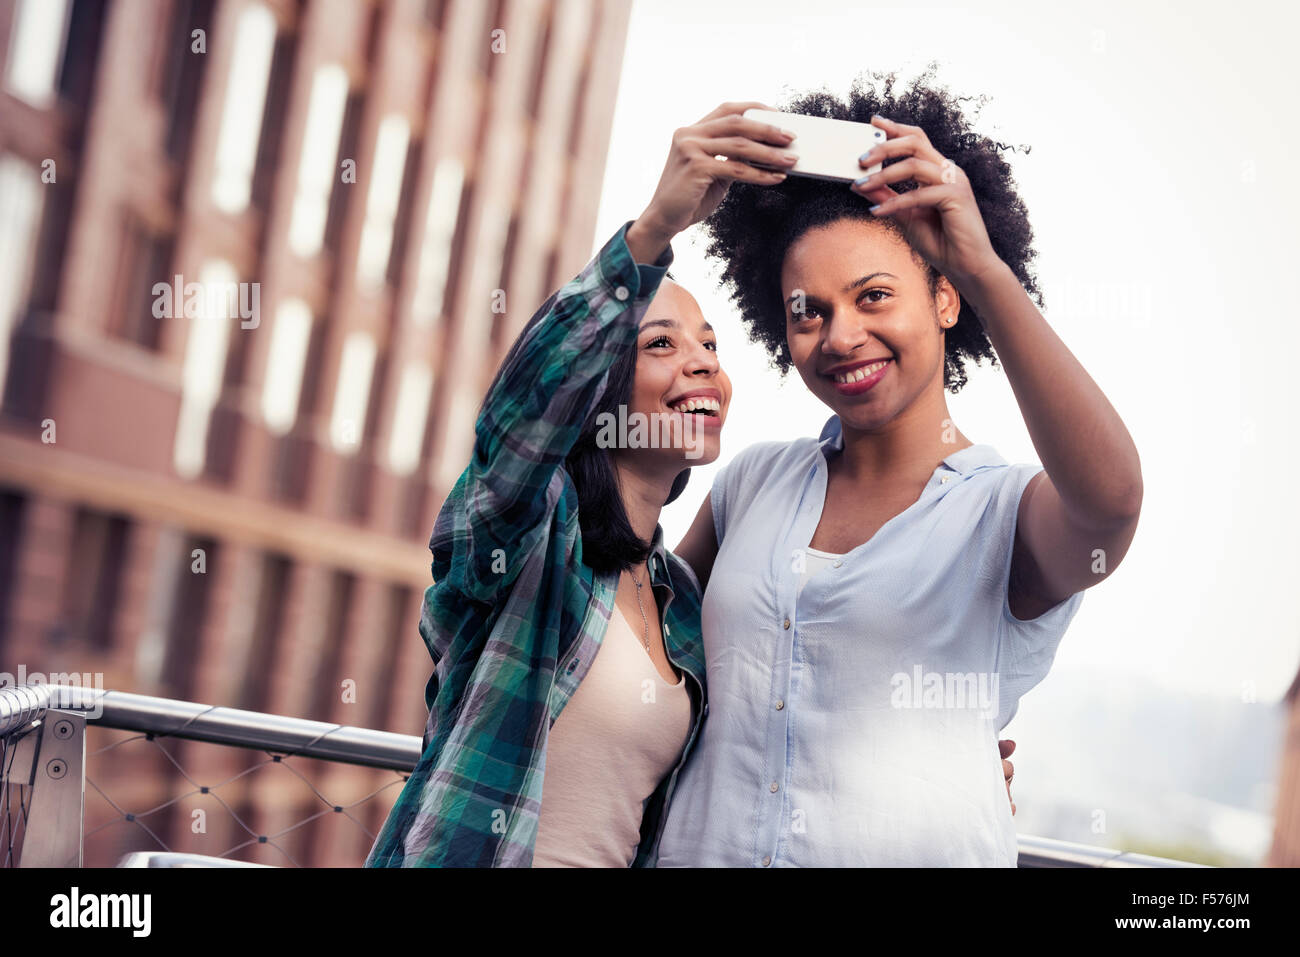 Two women posing and taking a selfie by a large building in the city Stock Photo